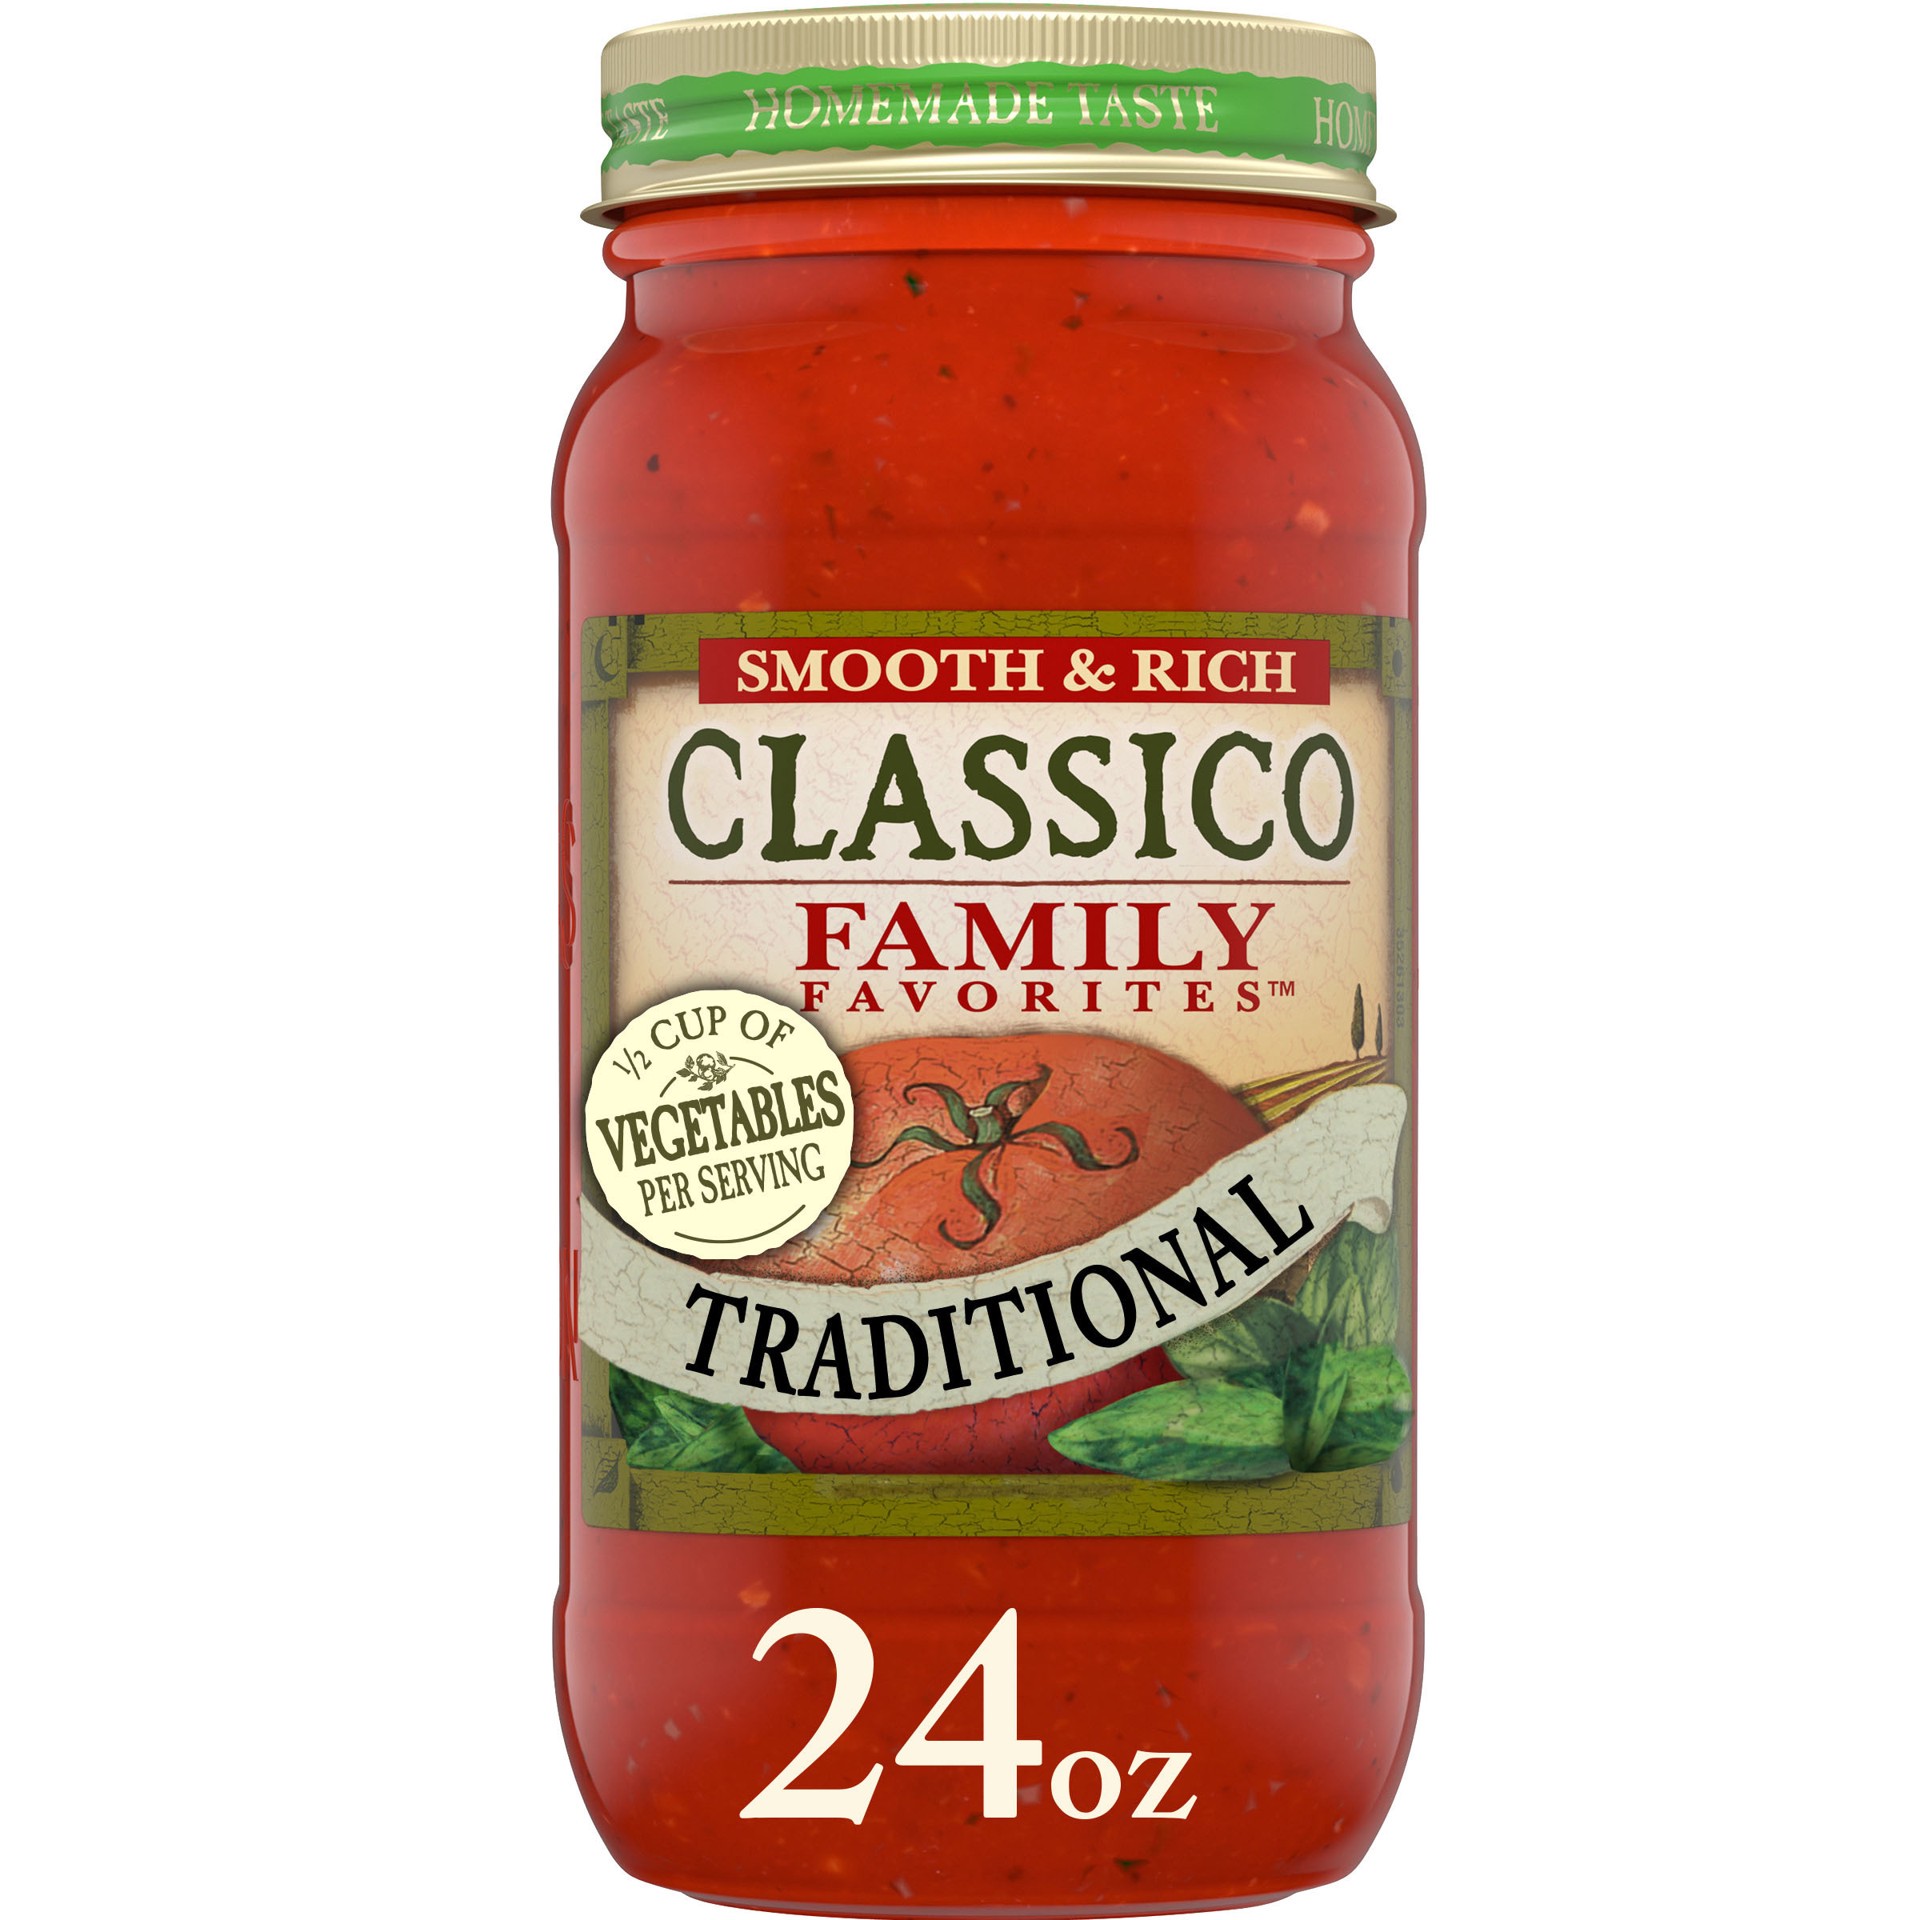 slide 1 of 9, Classico Family Favorites Traditional Smooth & Rich Pasta Sauce, 24 oz. Jar, 24 oz